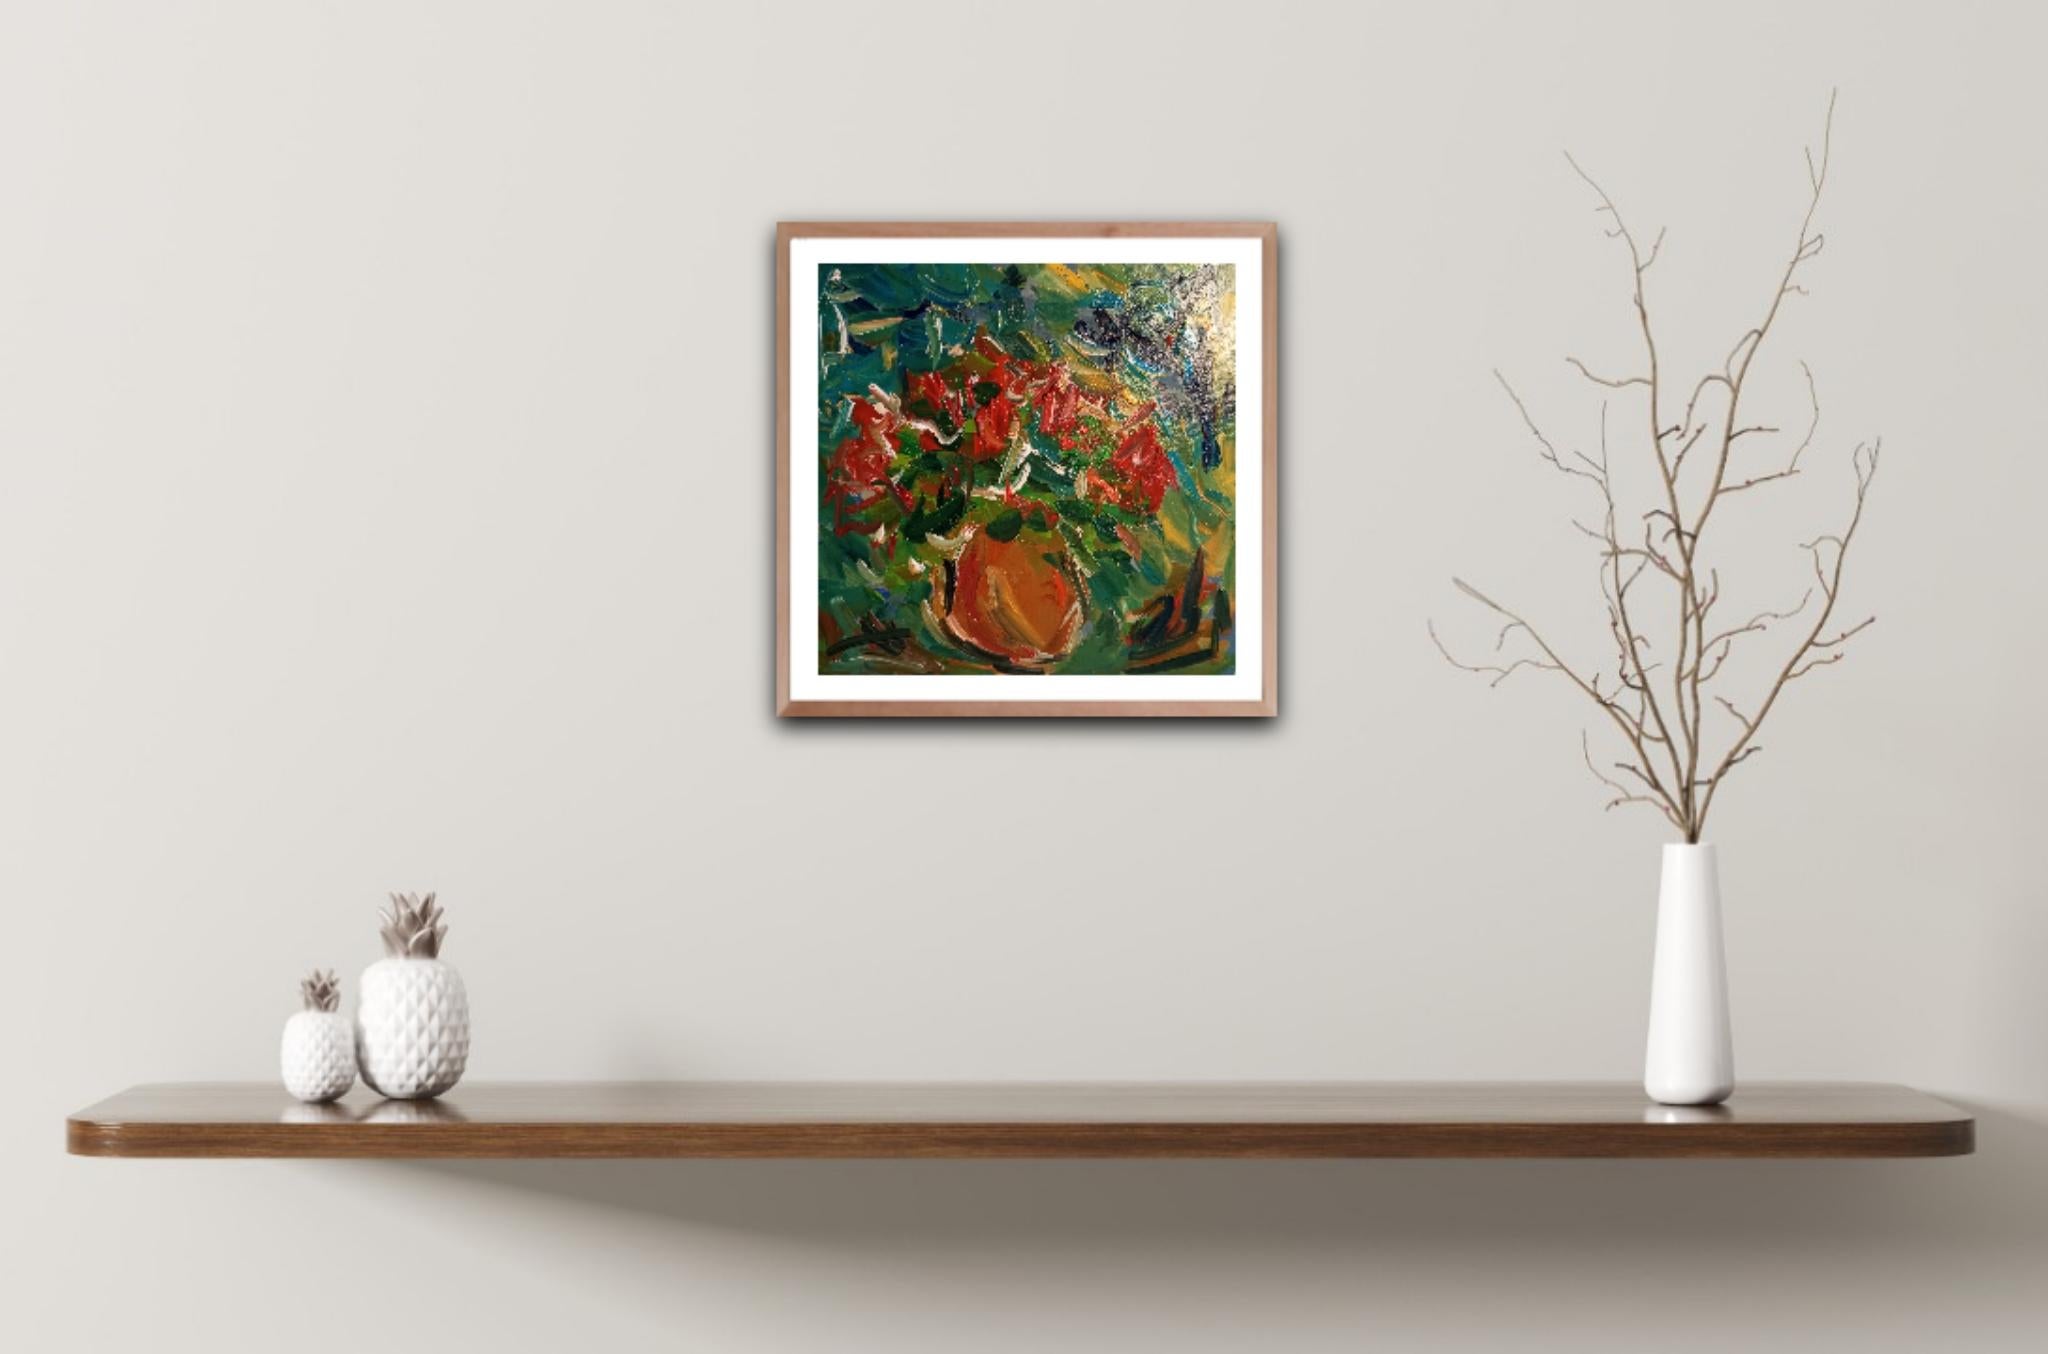 Dear art lover,

This artwork makes part of my series dedicated to the scenes of a summer period.

This floral painting  called 